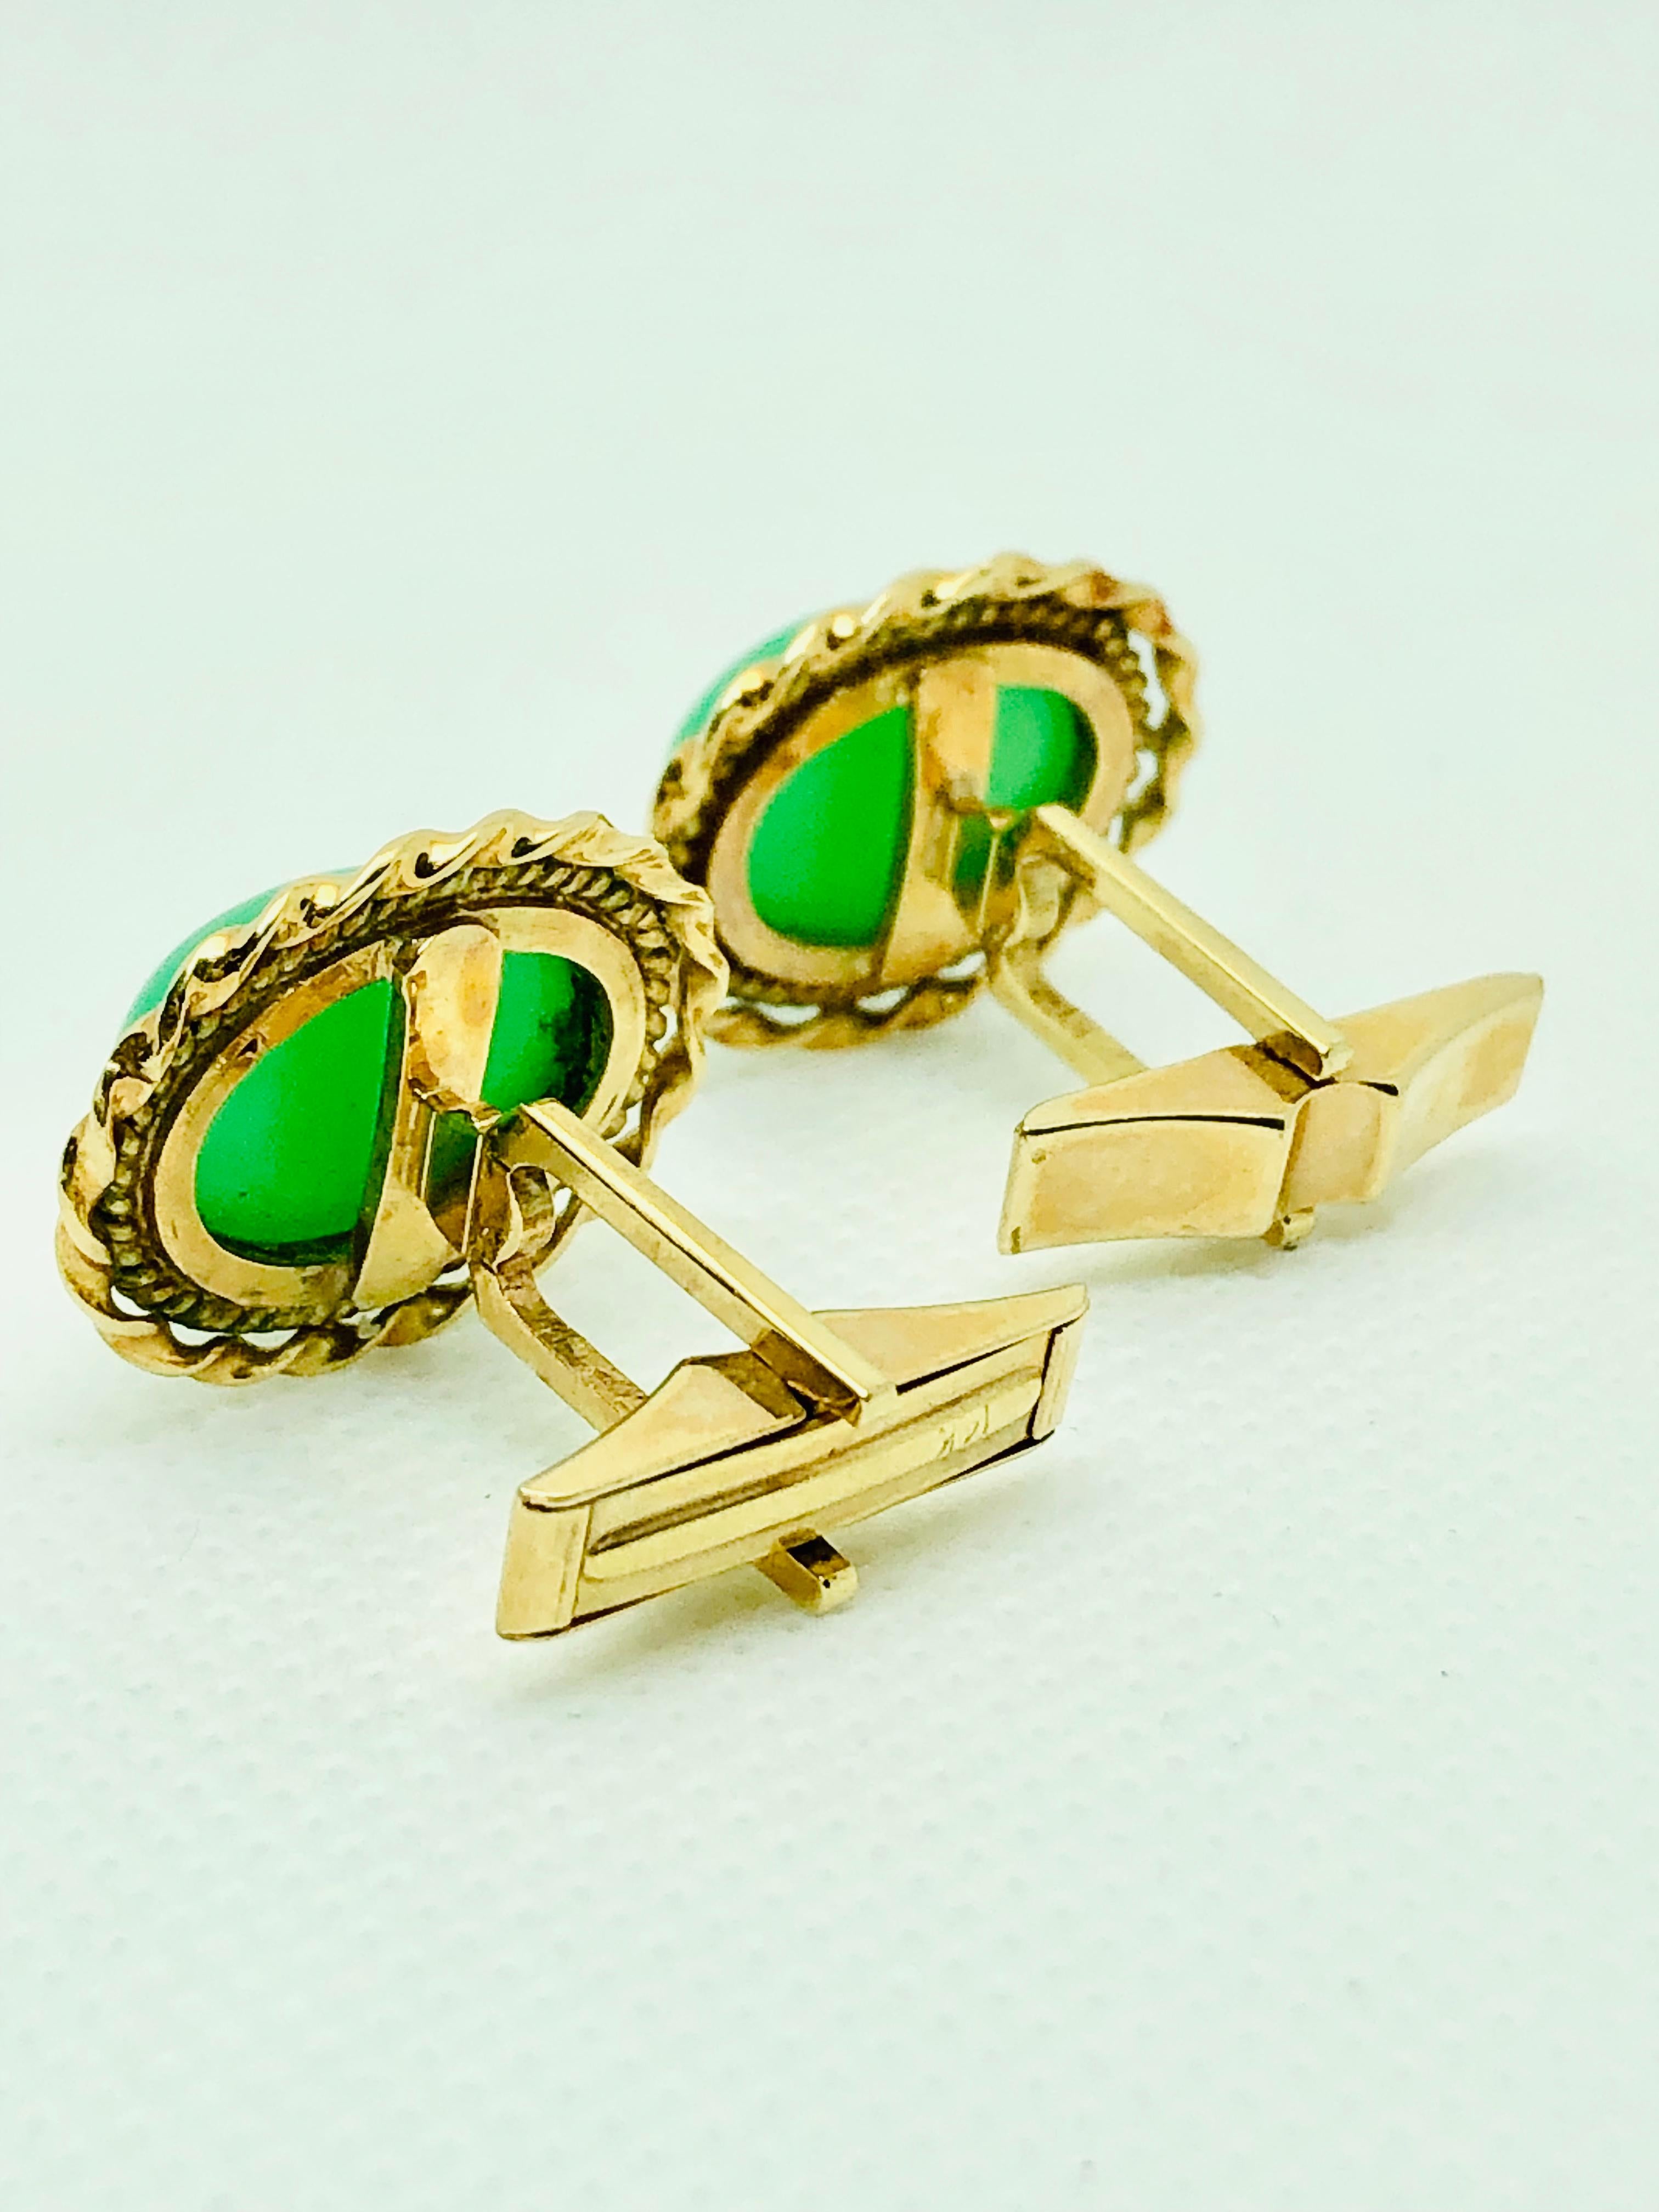 Contemporary Vintage 14 Karat Yellow Gold and Chalcedony Oval Cufflinks